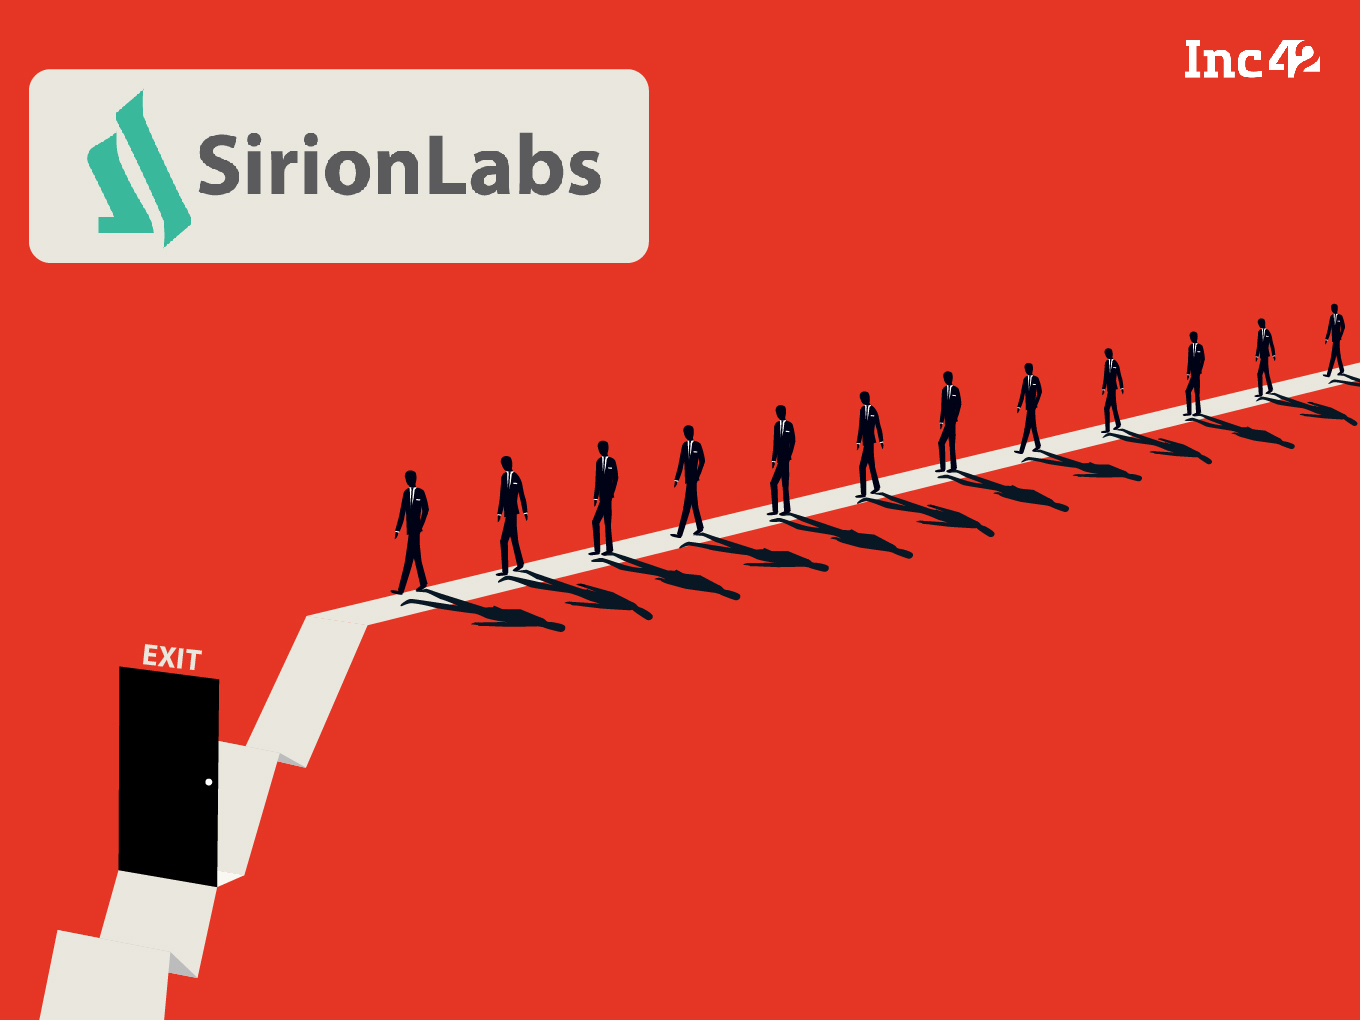 Exclusive: Days After Raising $25 Mn Funding, Tiger Backed SirionLabs Lays Off Around 140 Employees - Inc42 (Picture 1)